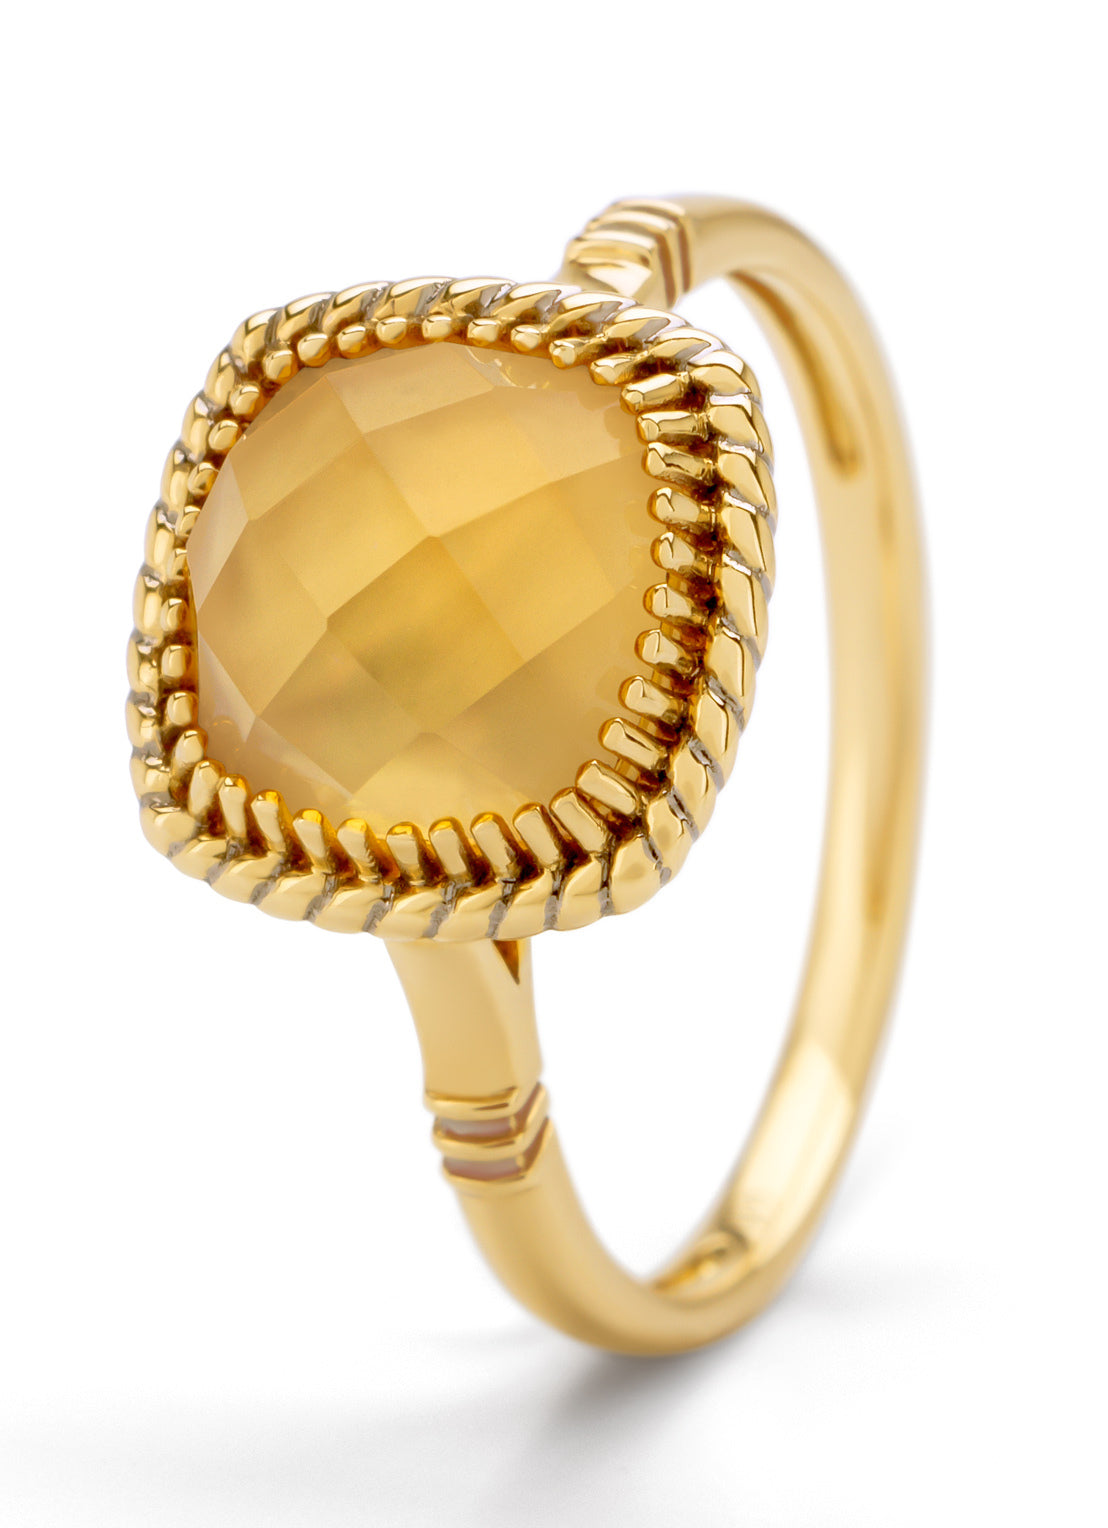 Yellow gold ring, orange citrine with mother -of -pearl, velvet